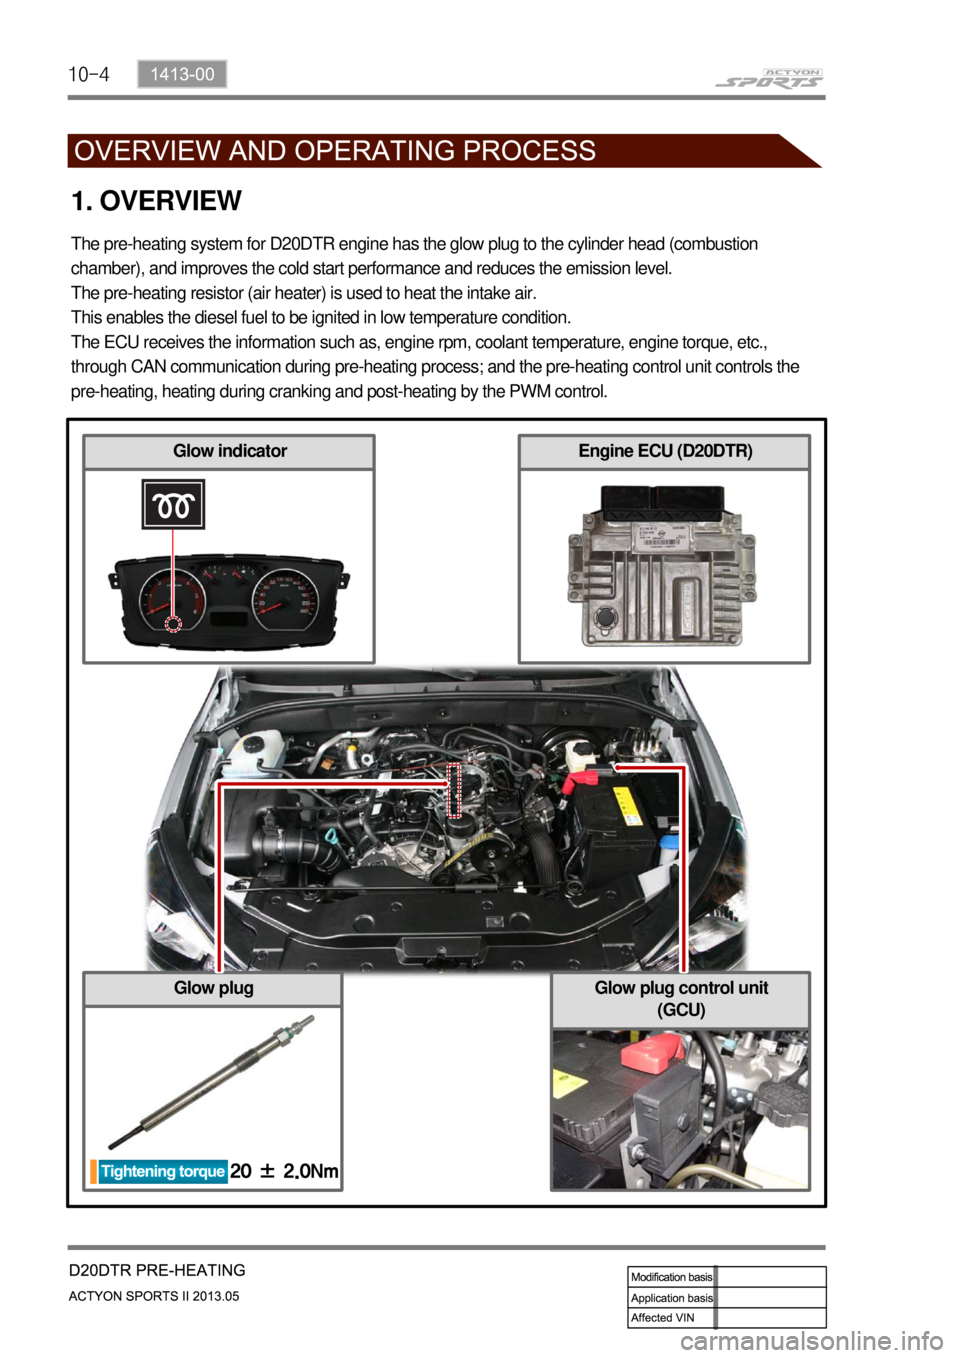 SSANGYONG NEW ACTYON SPORTS 2013  Service Manual 10-4
Glow plug control unit 
(GCU)
1. OVERVIEW
The pre-heating system for D20DTR engine has the glow plug to the cylinder head (combustion 
chamber), and improves the cold start performance and reduce